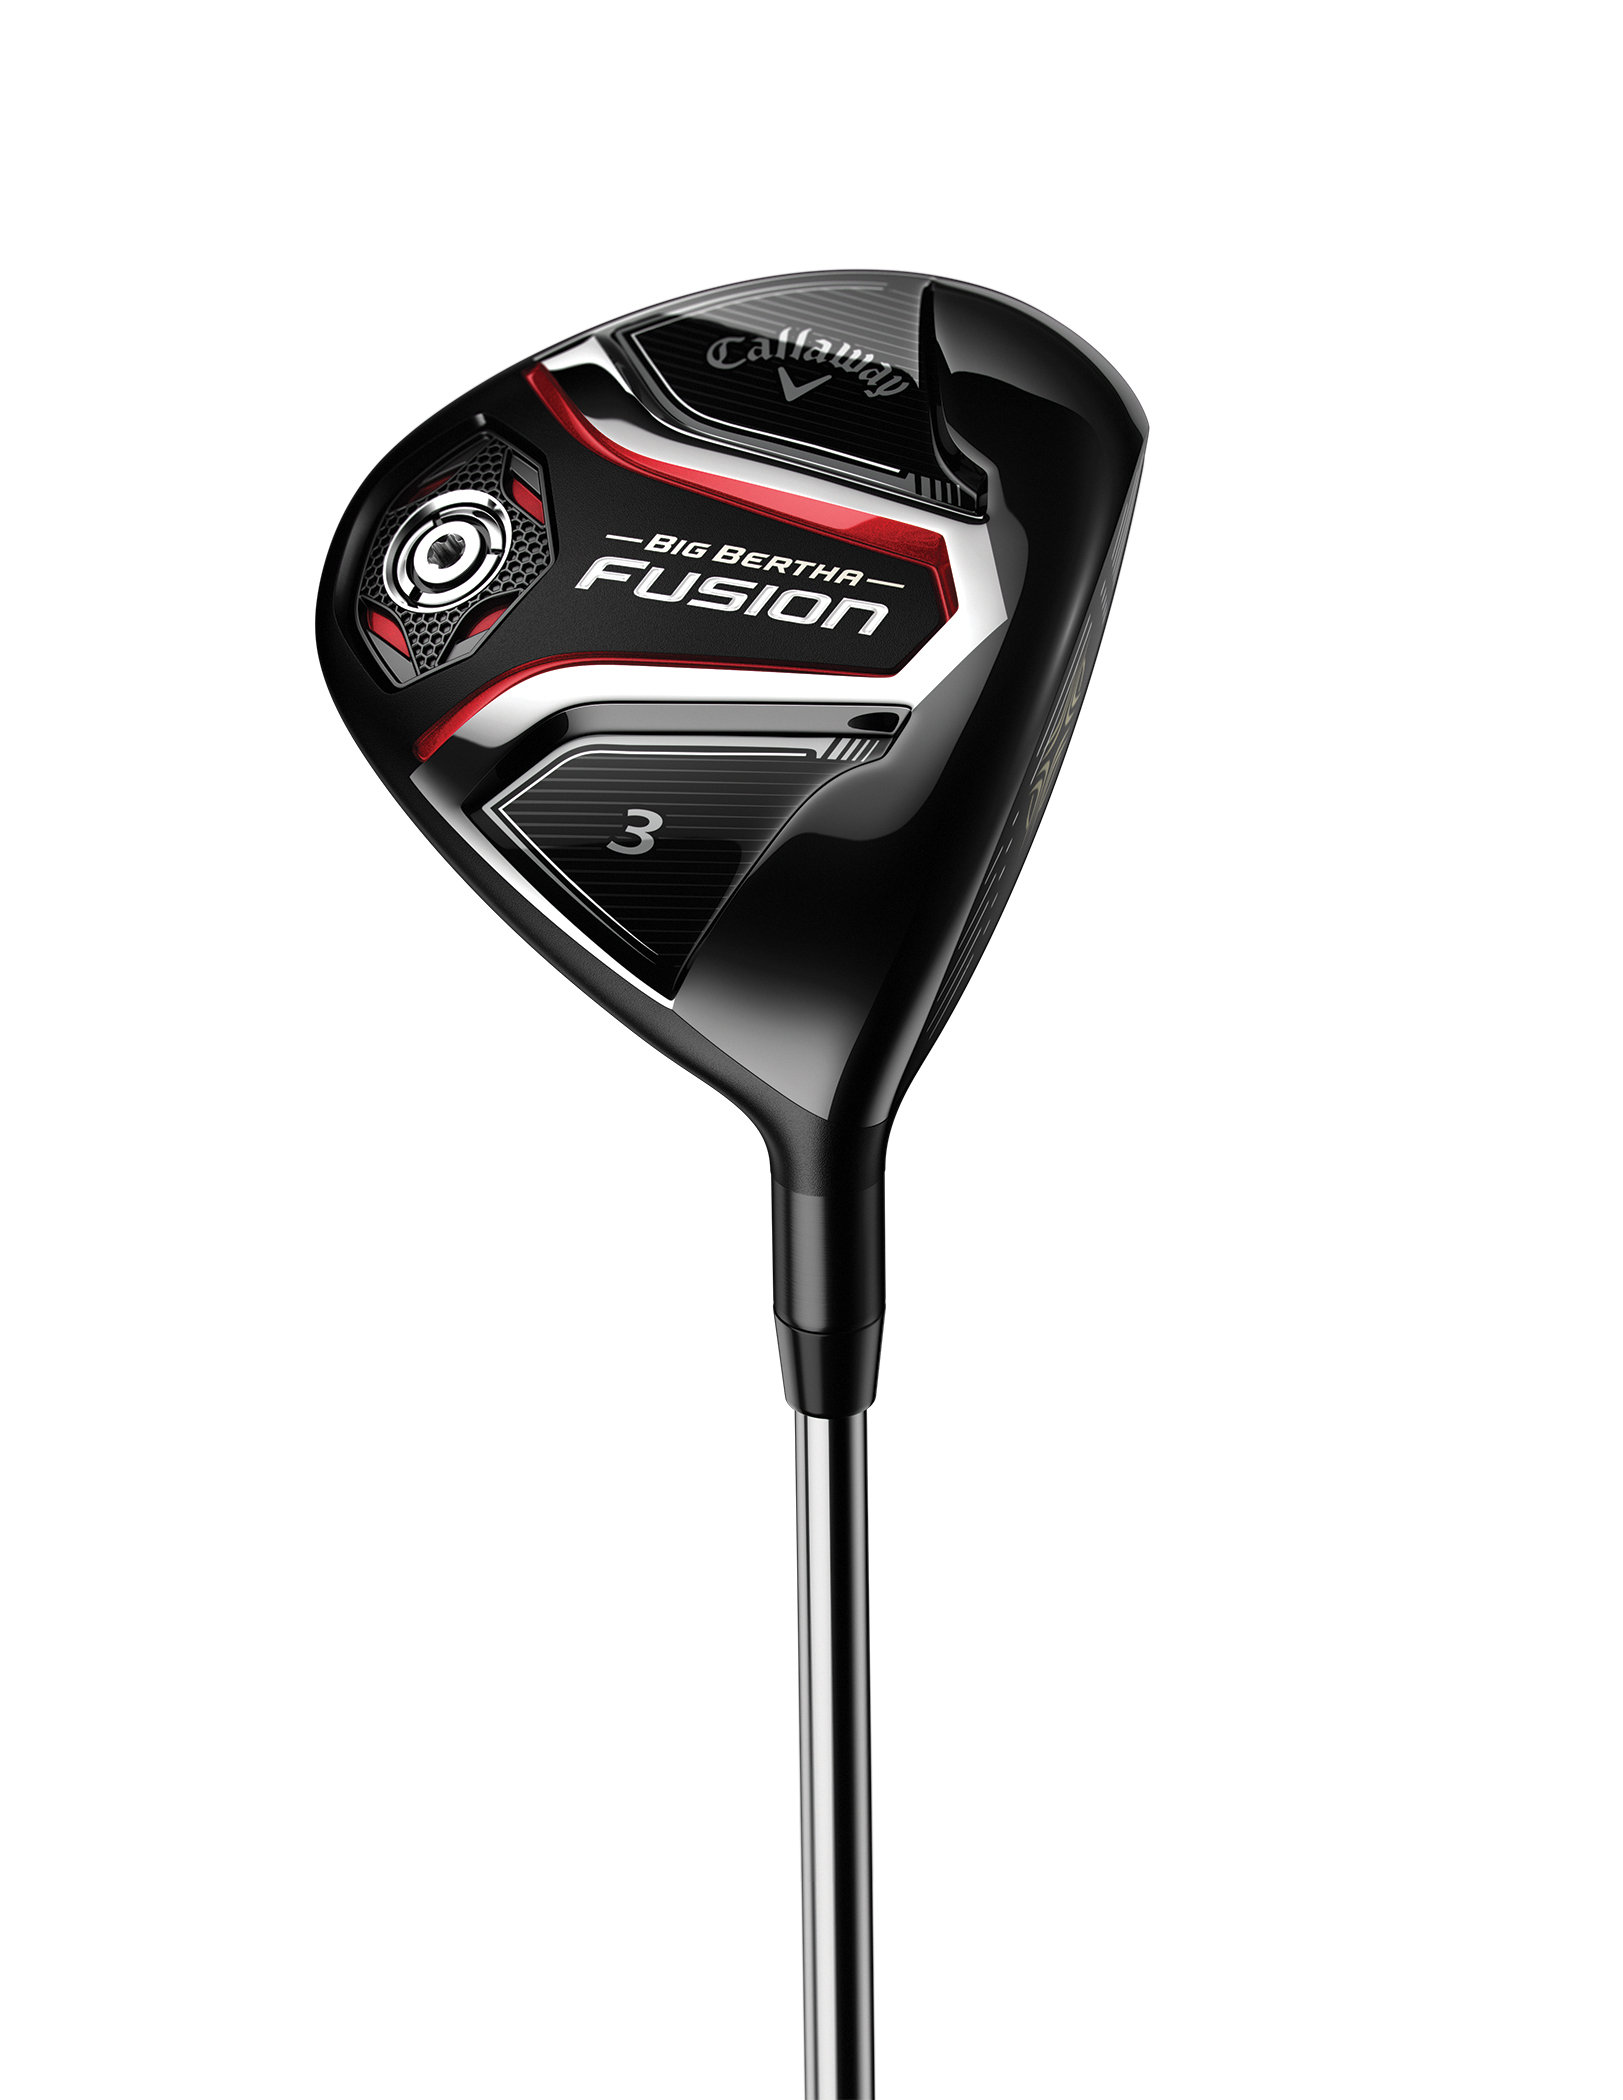 Preview Callaway Golf Big Bertha Fusion Driver And Fairway Woods